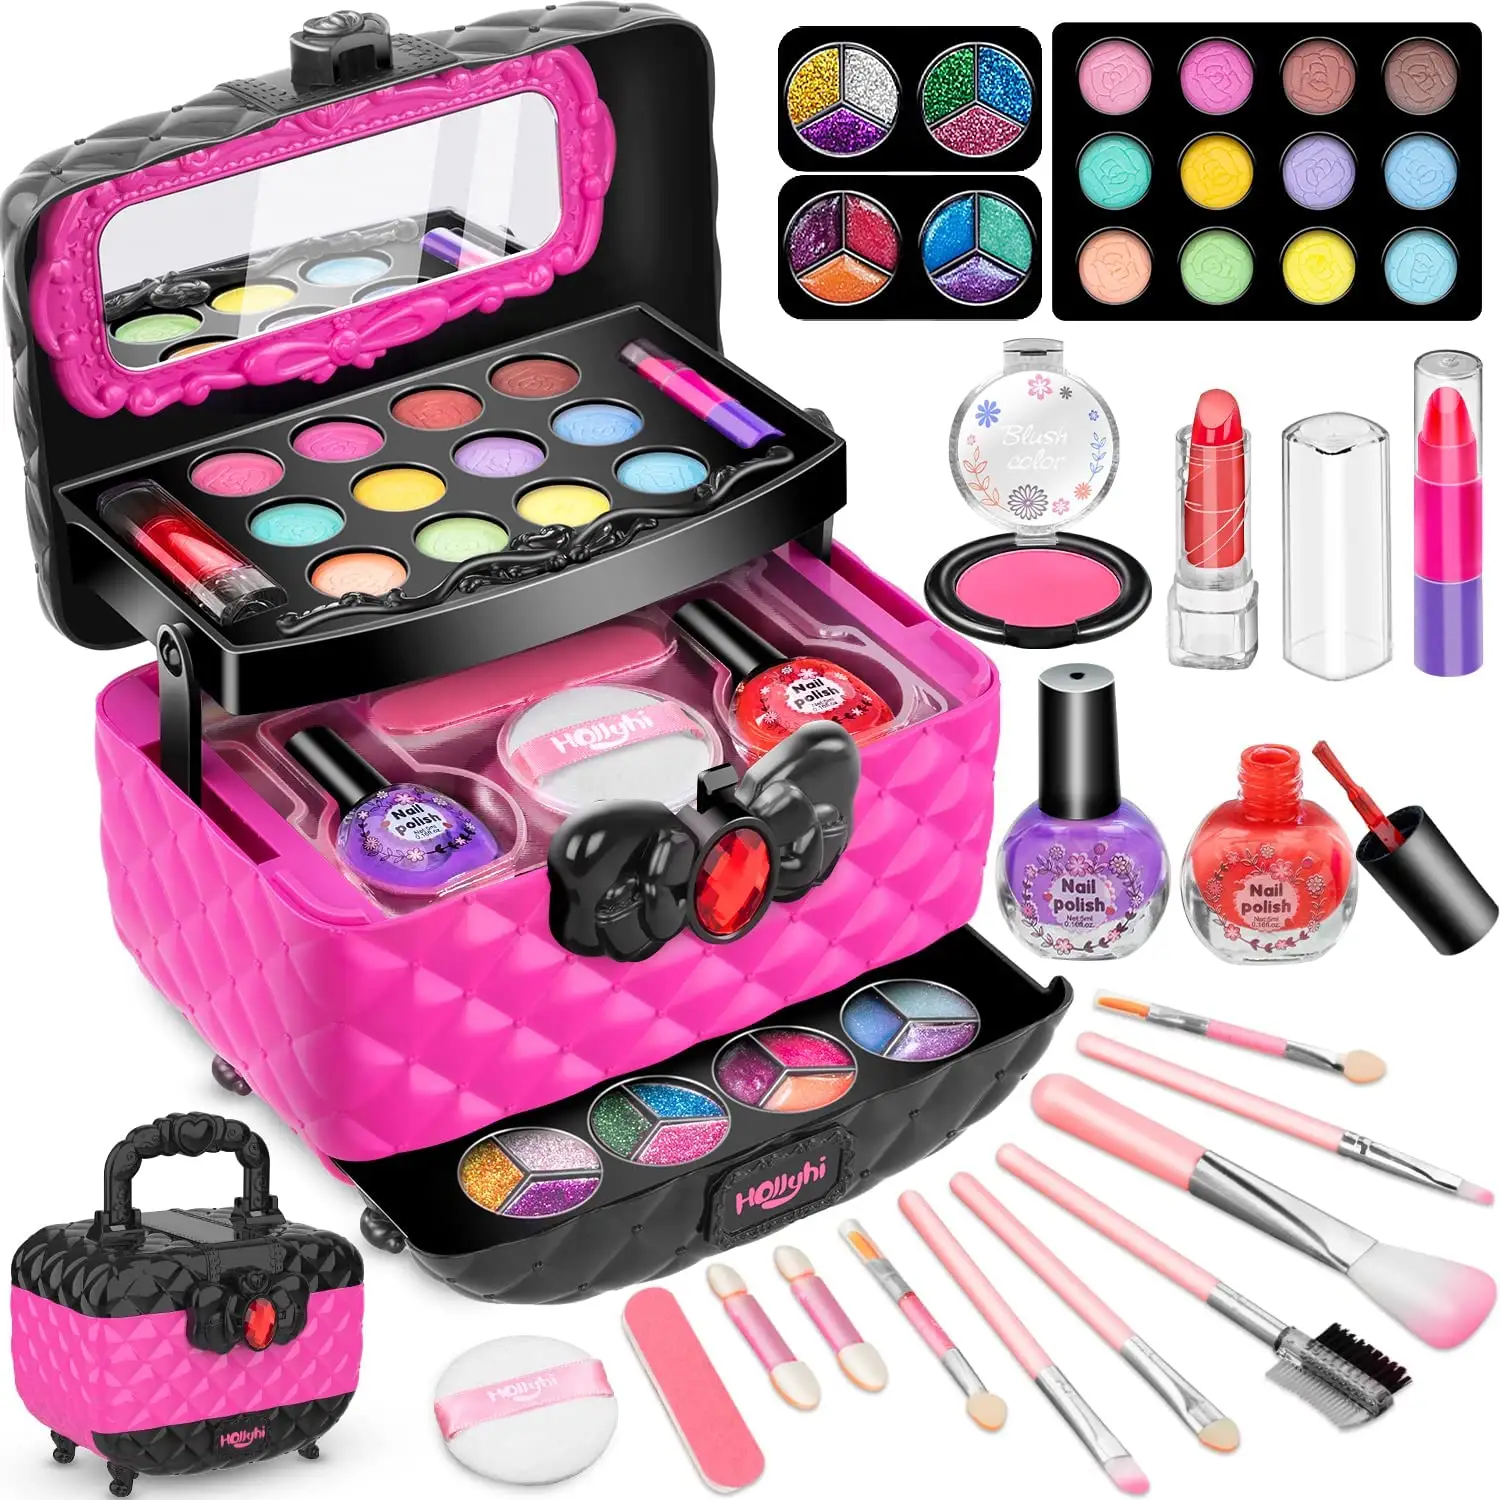 Huiye Kids Makeup Toy Kit for Girls, Washable Makeup Set Toy with Real Cosmetic Case for Little Girl